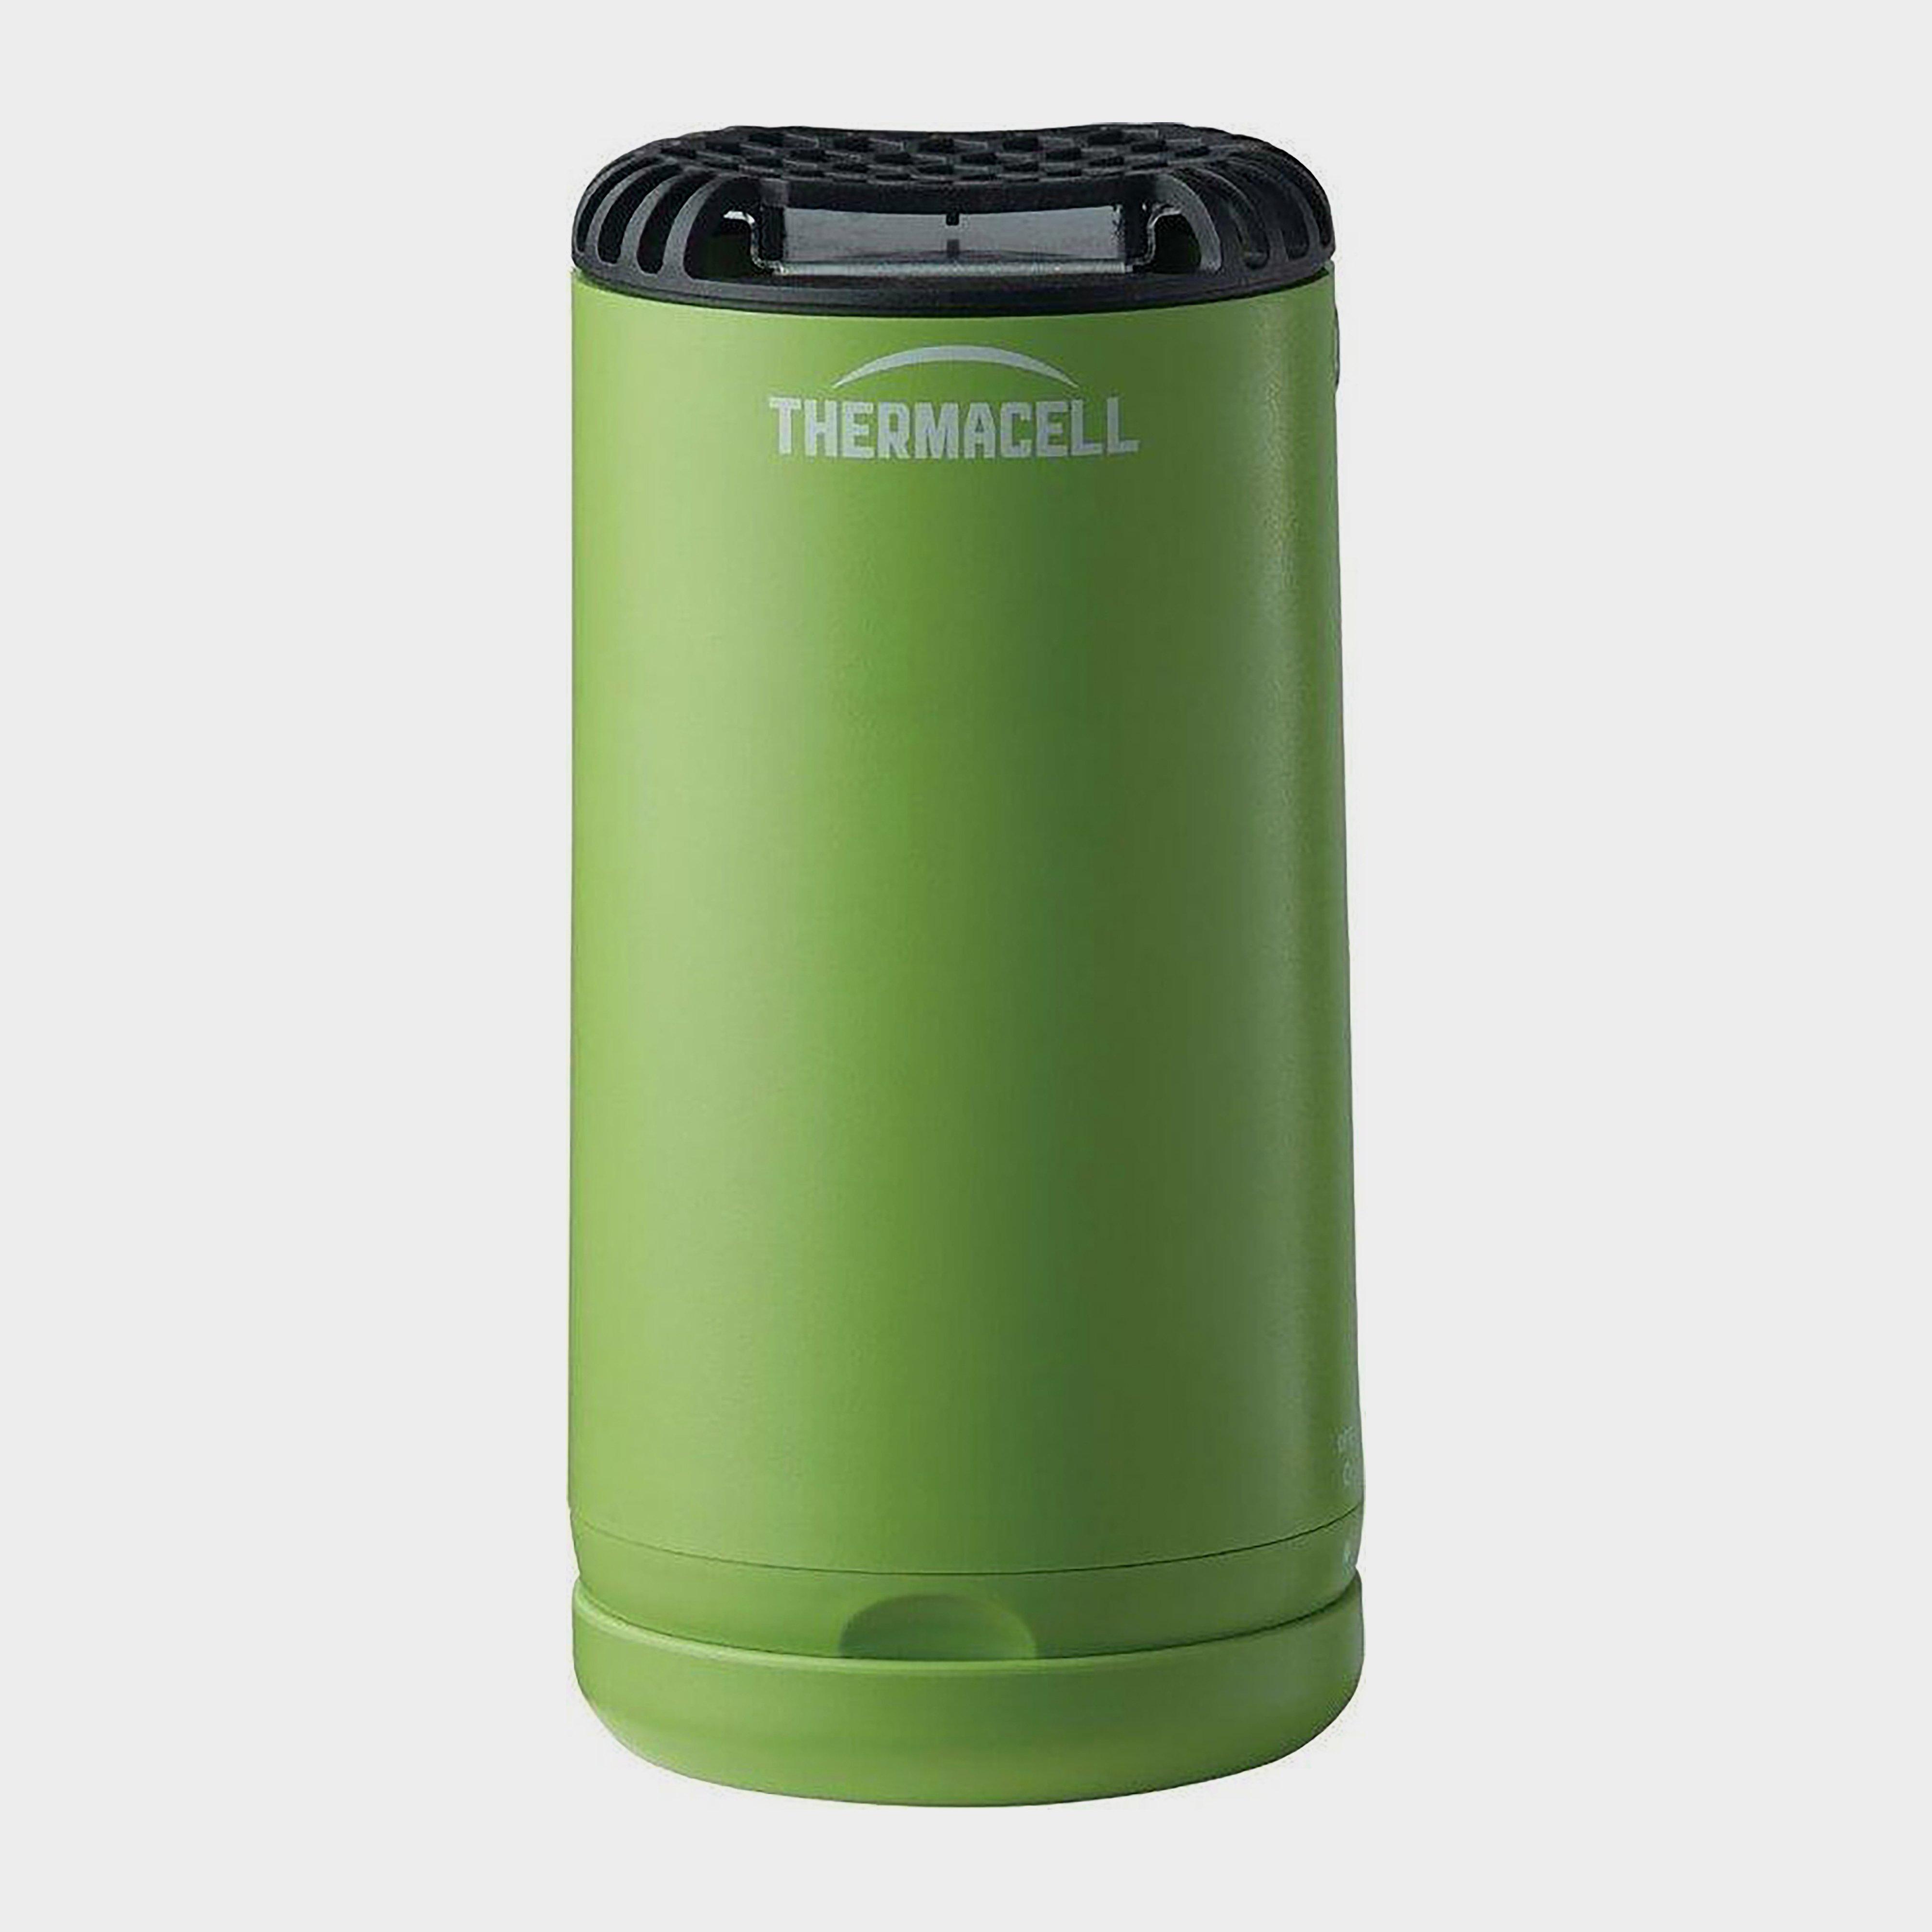  THERMACELL Halo Mini Mosquito Repeller, Green